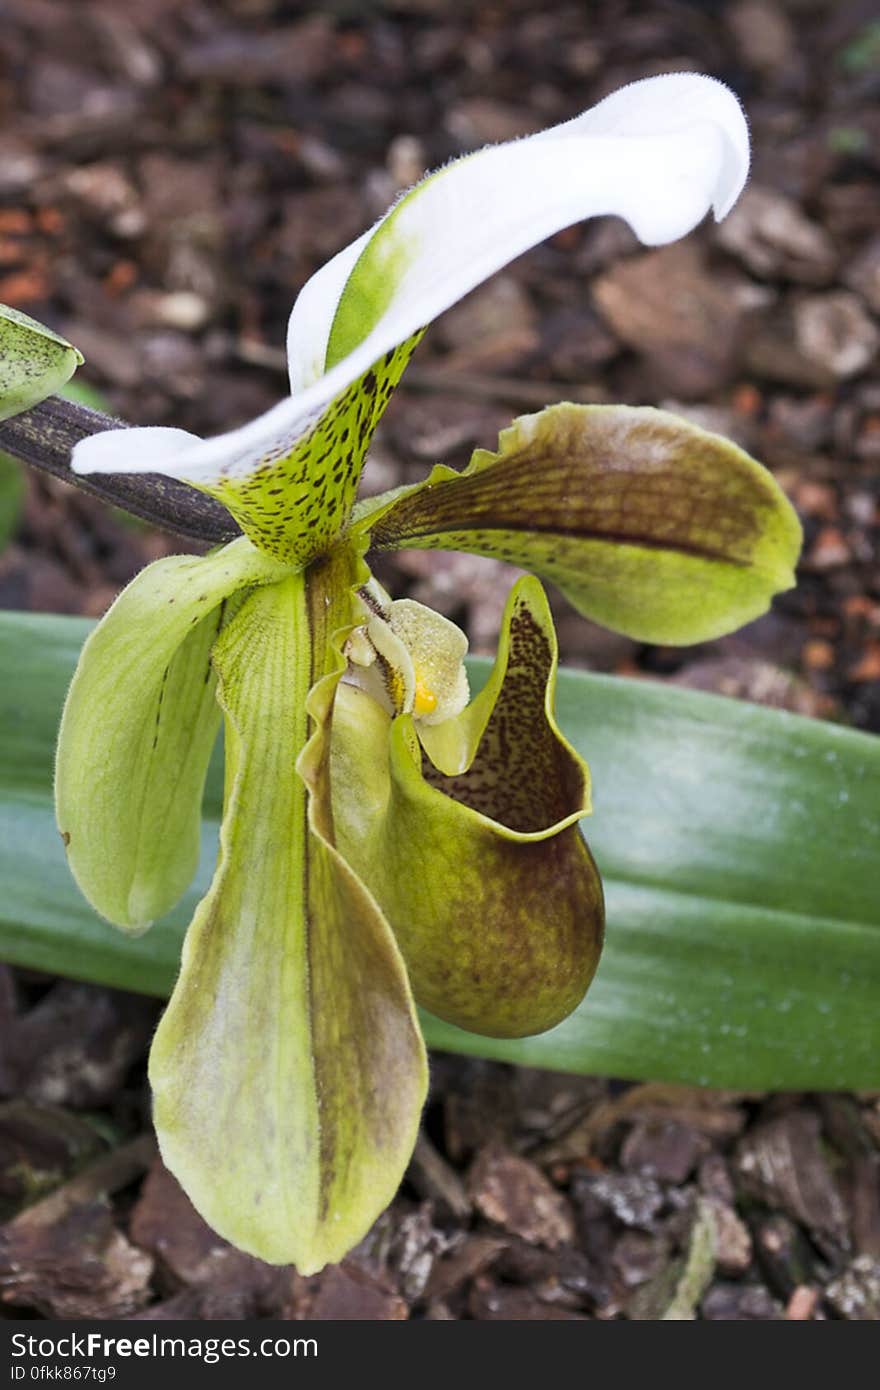 This slipper-shaped orchid uses a pouch where polen is found to attract insects for pollination. This slipper-shaped orchid uses a pouch where polen is found to attract insects for pollination.